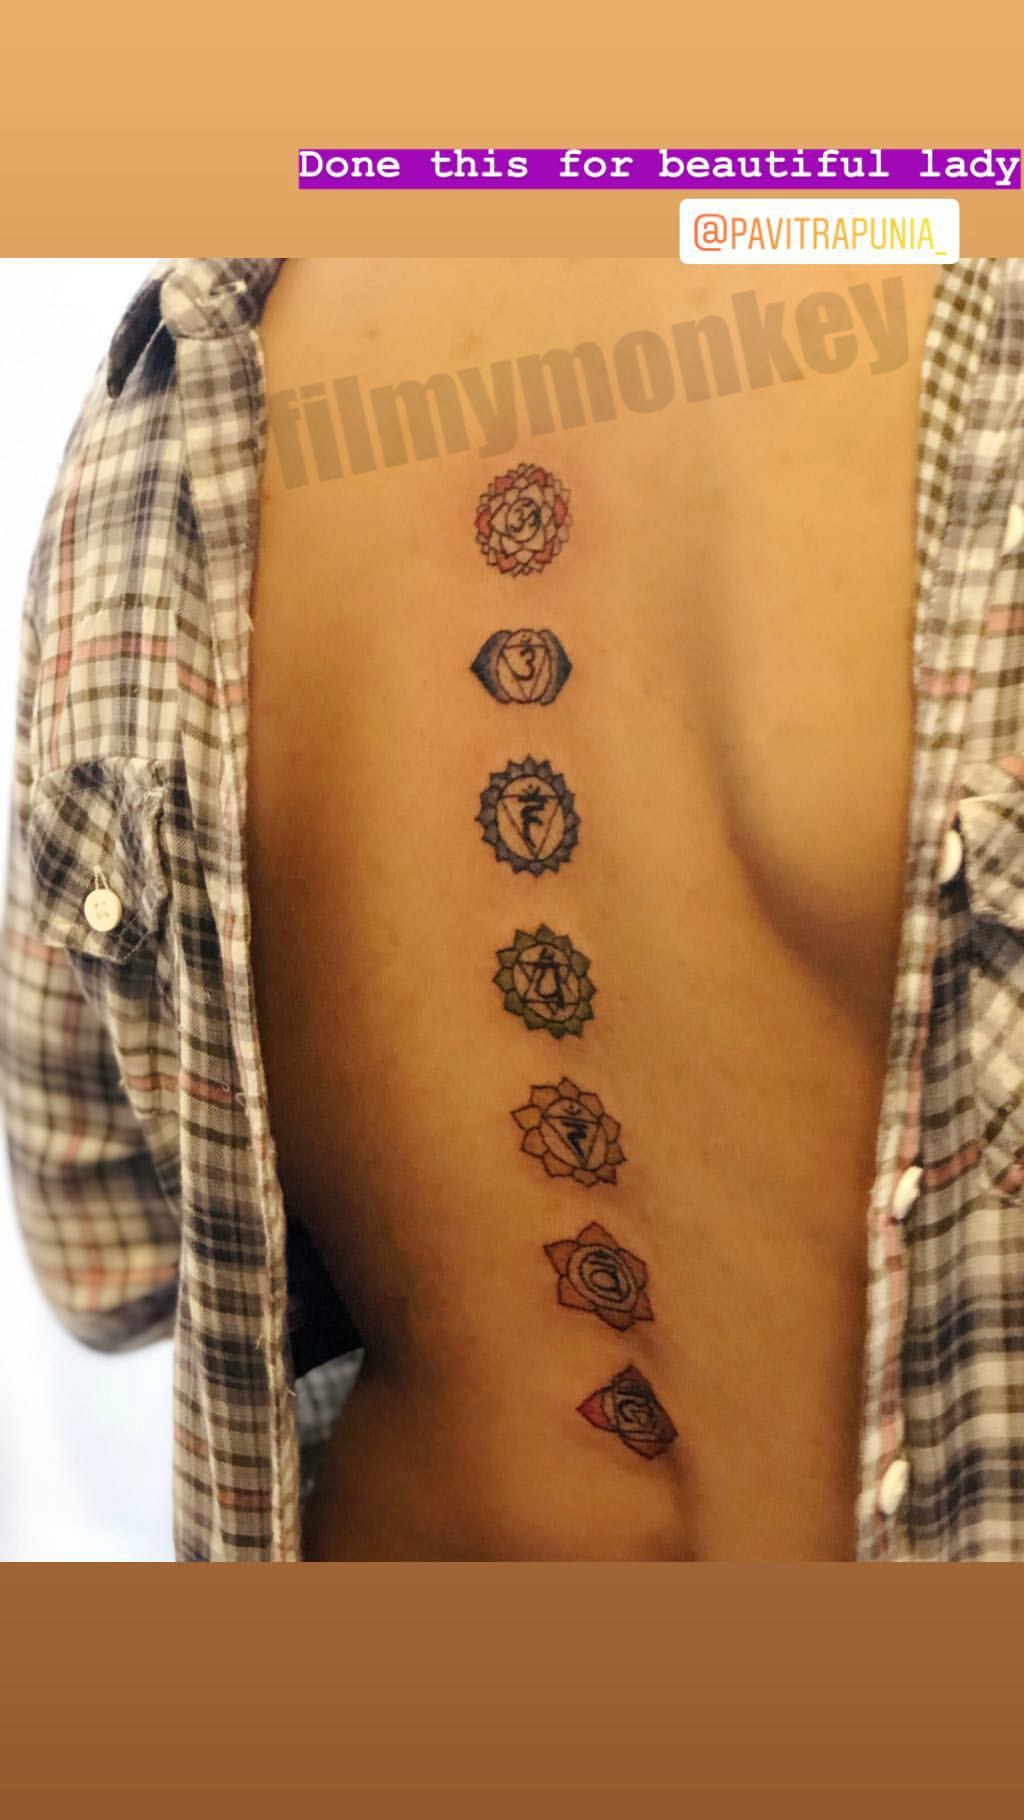 Dead Lucky Tattoo  7 chakras down the spine No tears only Laughts    Facebook